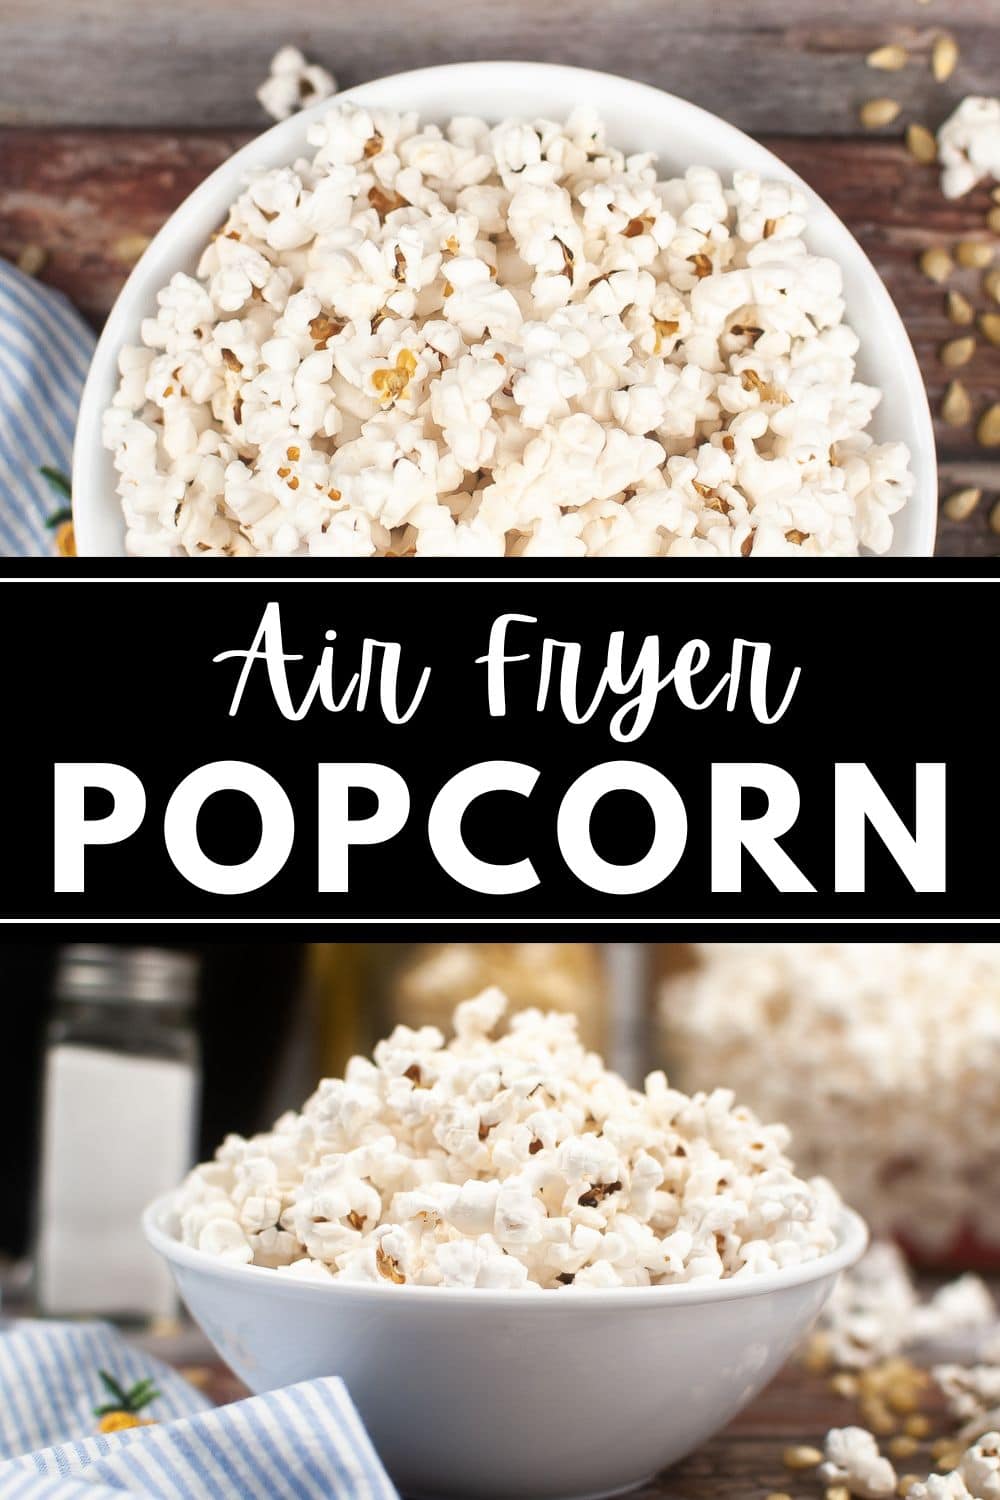 A bowl of air fryer popcorn with text indicating the method used to prepare the snack.